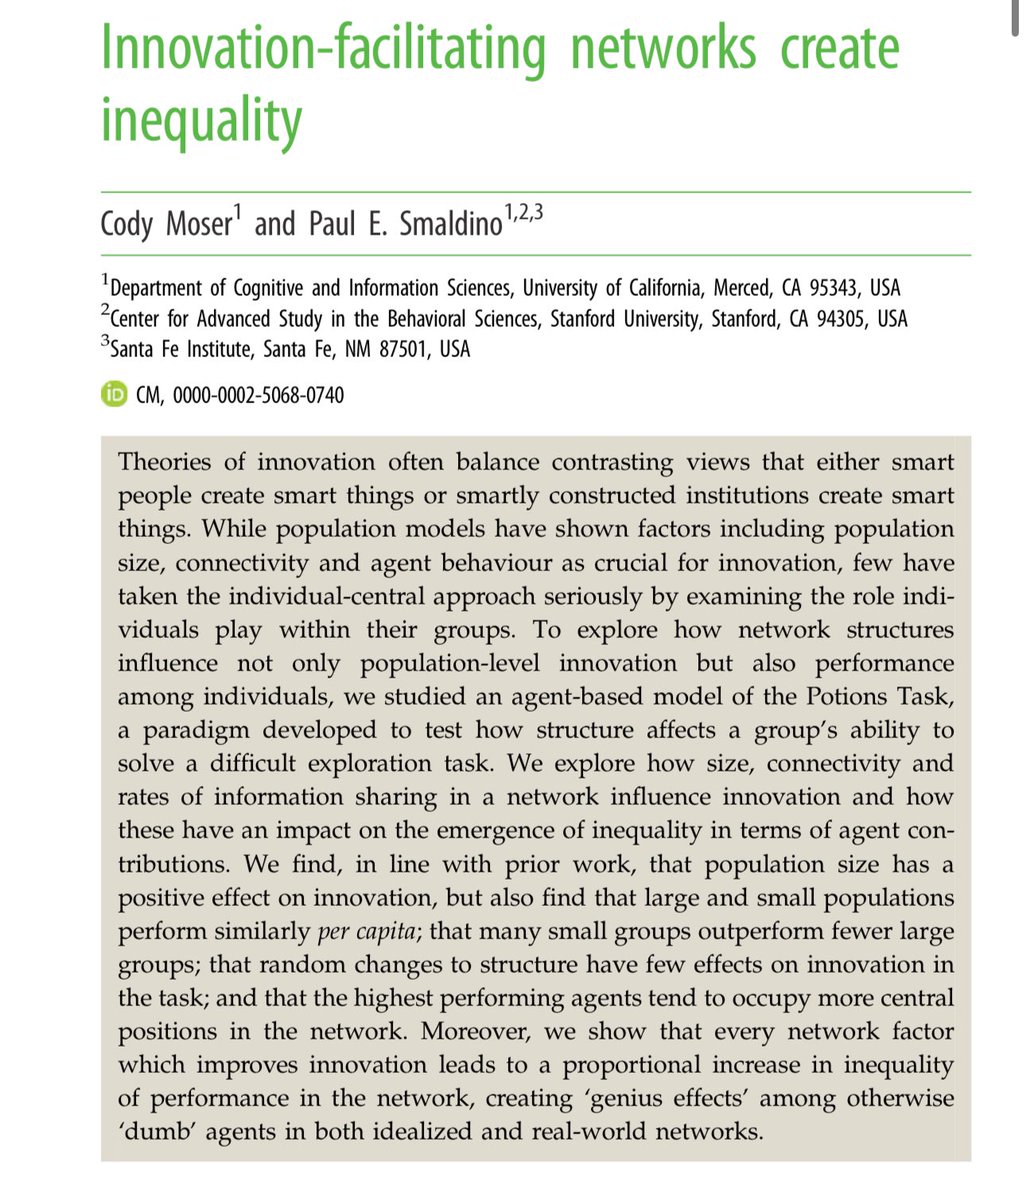 New paper shows that groups out-innovate individuals, and that many small groups beat a big one. So far no surprise. But the network structures that boost innovation most also create inequality, even if all abilities are the same, as well-connected “brokers” get extra returns.